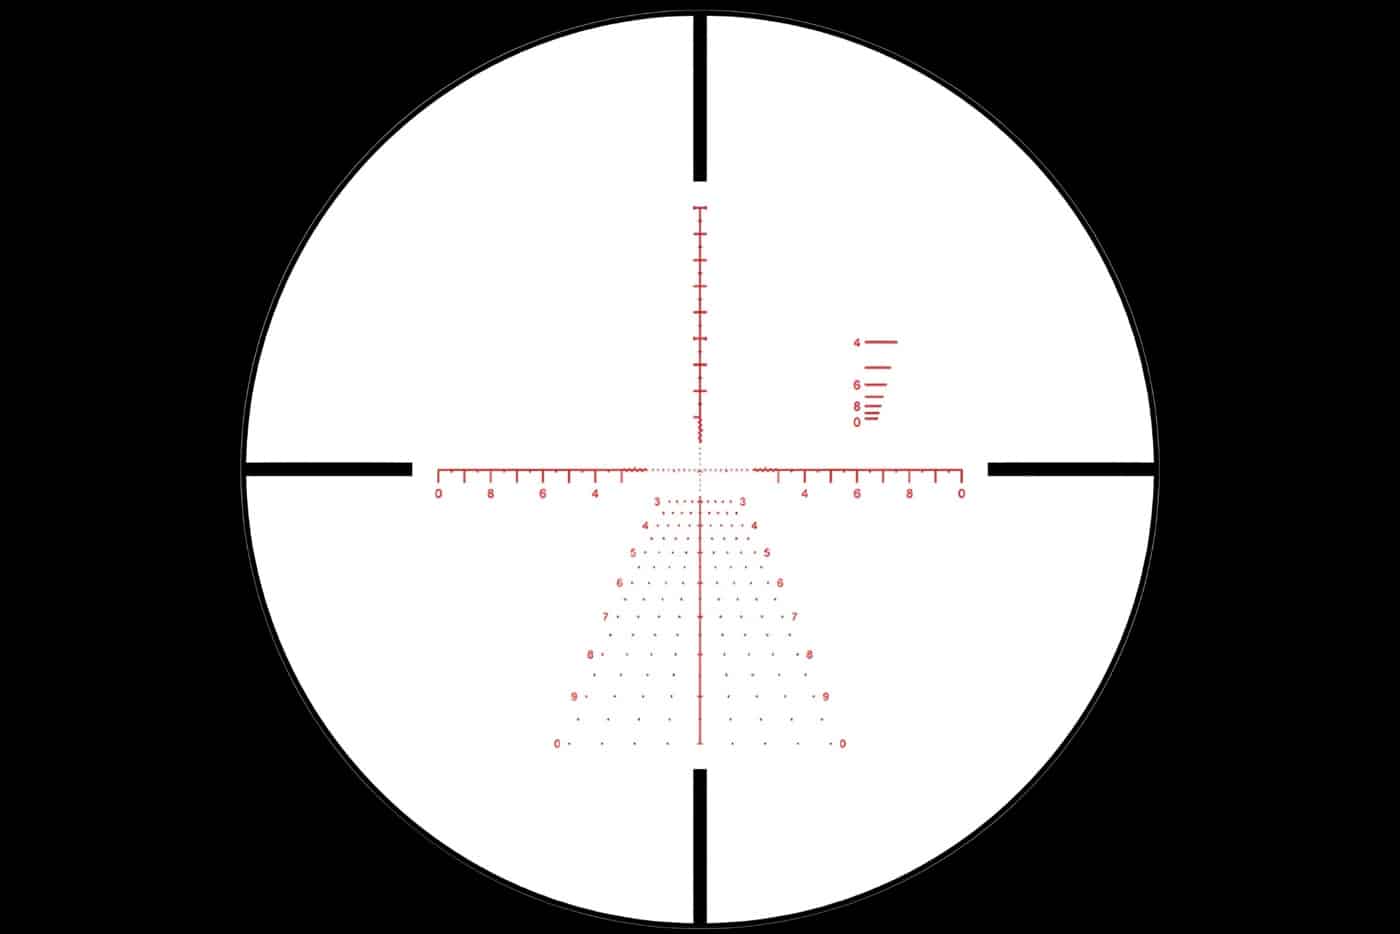 In this image, we see the reticle used in this telescopic sight. The first focal plane ACSS reticle adjusts with the magnification. It uses illumination that offers good brightness in all lighting conditions. For optical performance, it is excellent across all of the 3-18 times magnification — especially at 18x.  